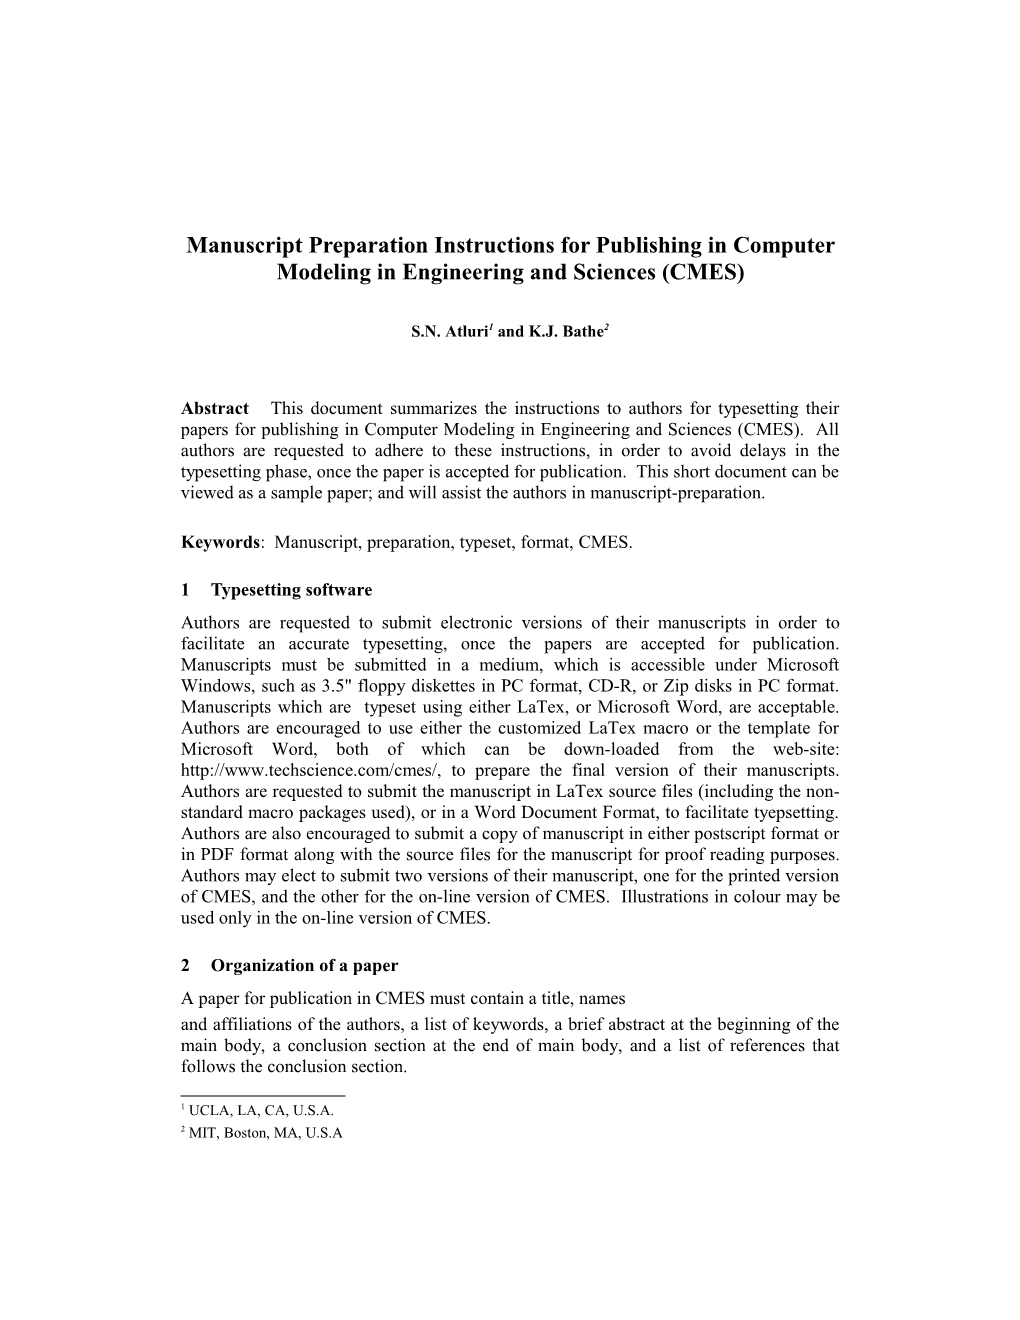 Manuscript Preparation Instruction for Publishing in Computer Modeling in Engineering And